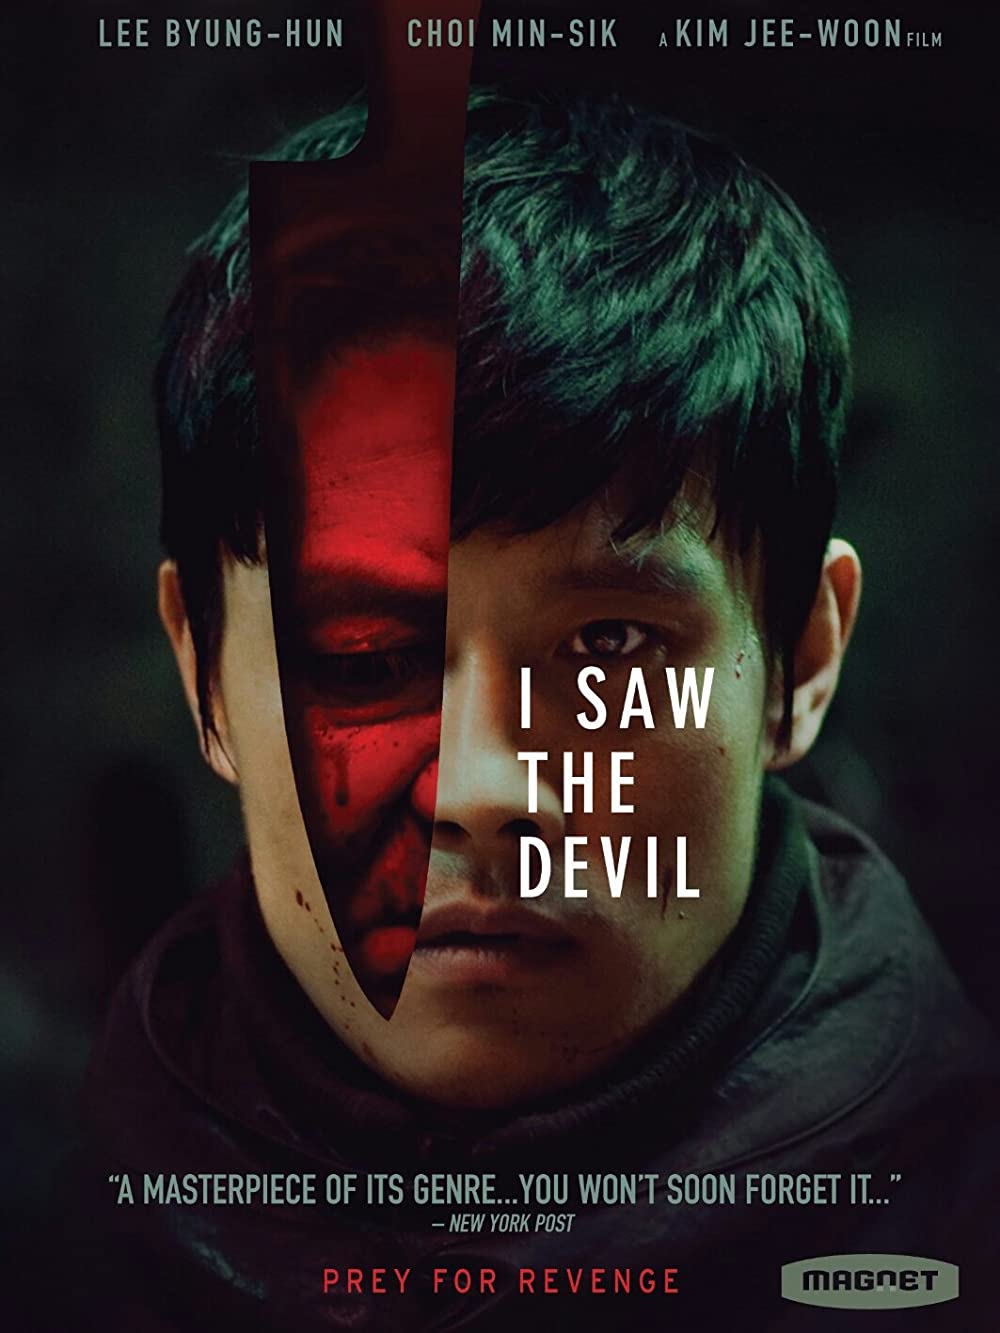 10 Korean Thrillers you can't afford to miss